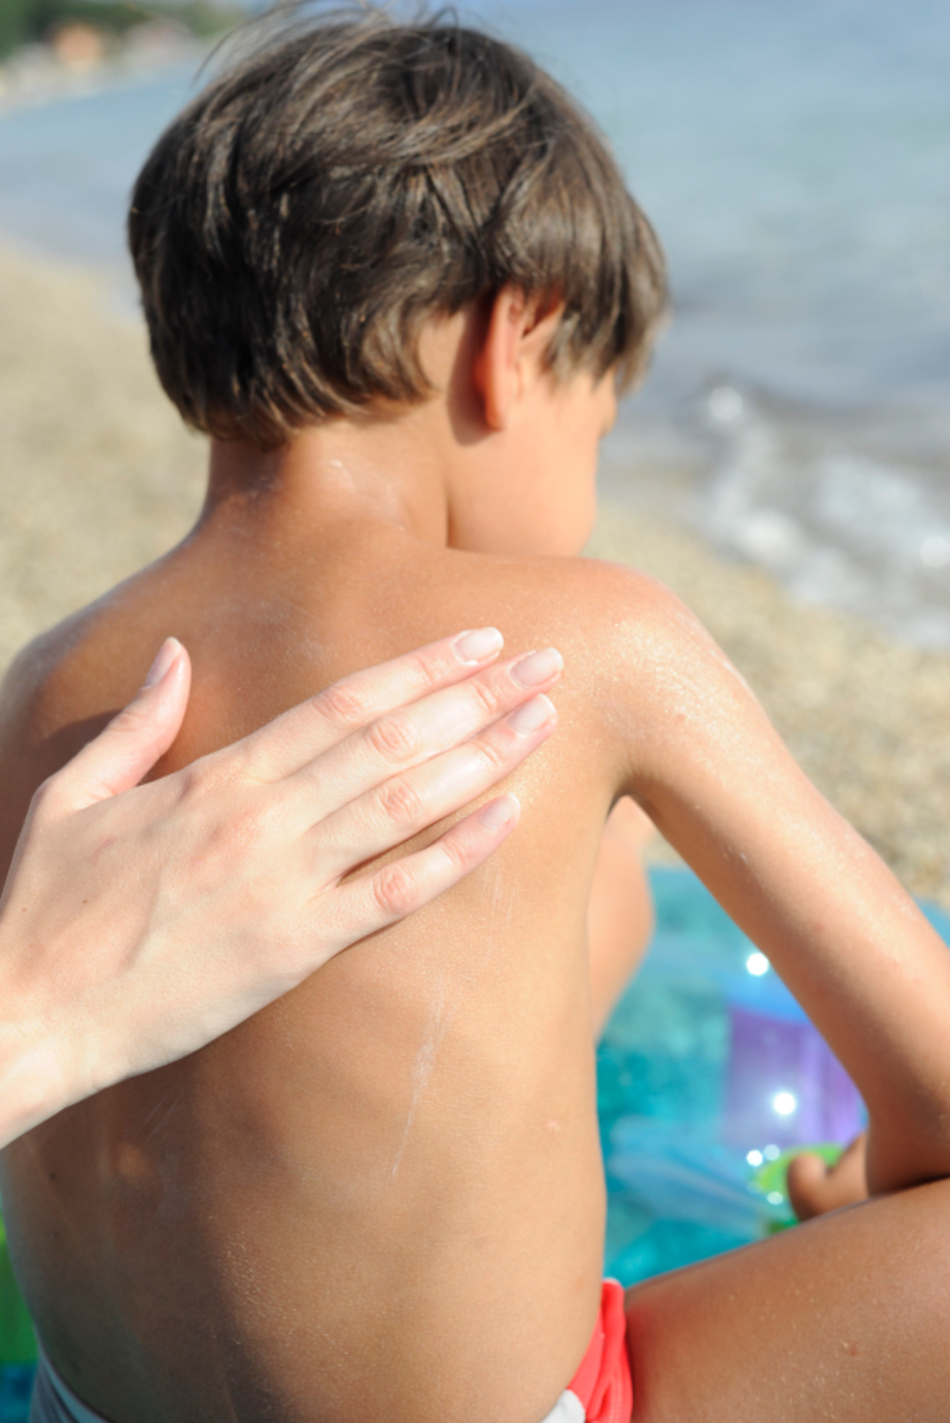 Sun Damage is More Harmful to Children